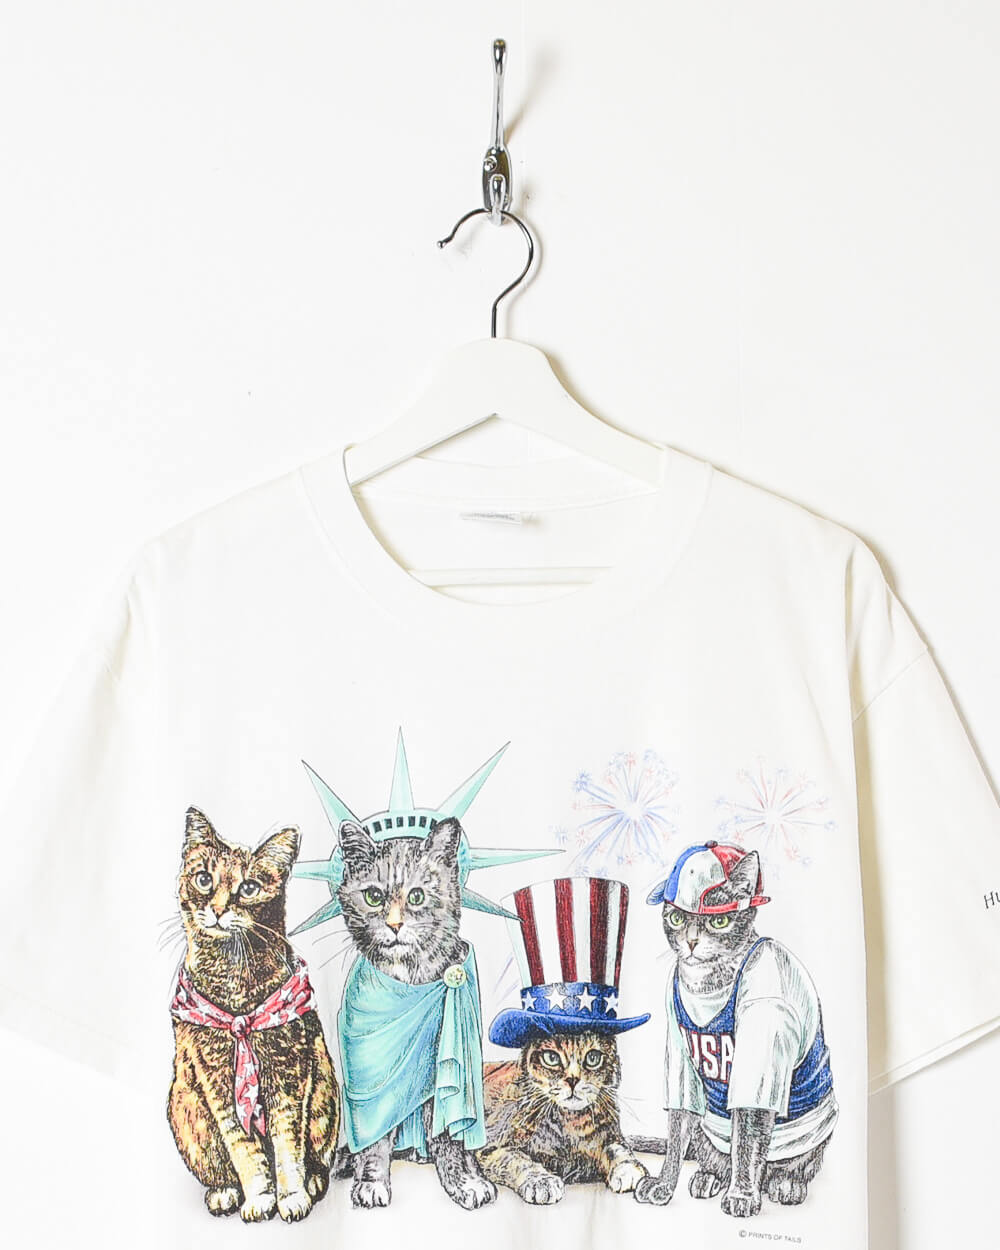 White Patriotic Cats Graphic T-Shirt - Large